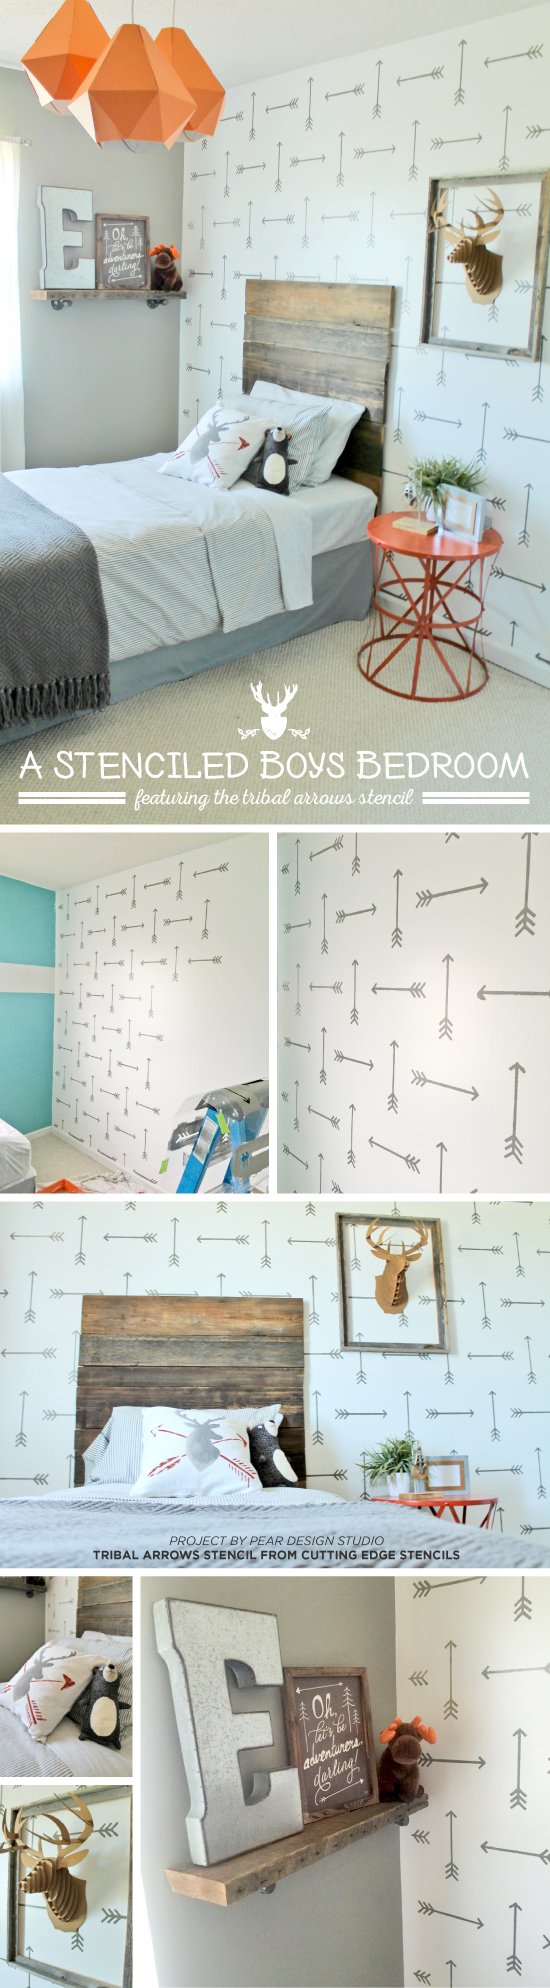 Cutting Edge Stencils shares a DIY stenciled accent wall in a rustic boys room using the Tribal Arrows Allover Stencil. http://www.cuttingedgestencils.com/tribal-arrow-pattern-stencils-wall-decor.html